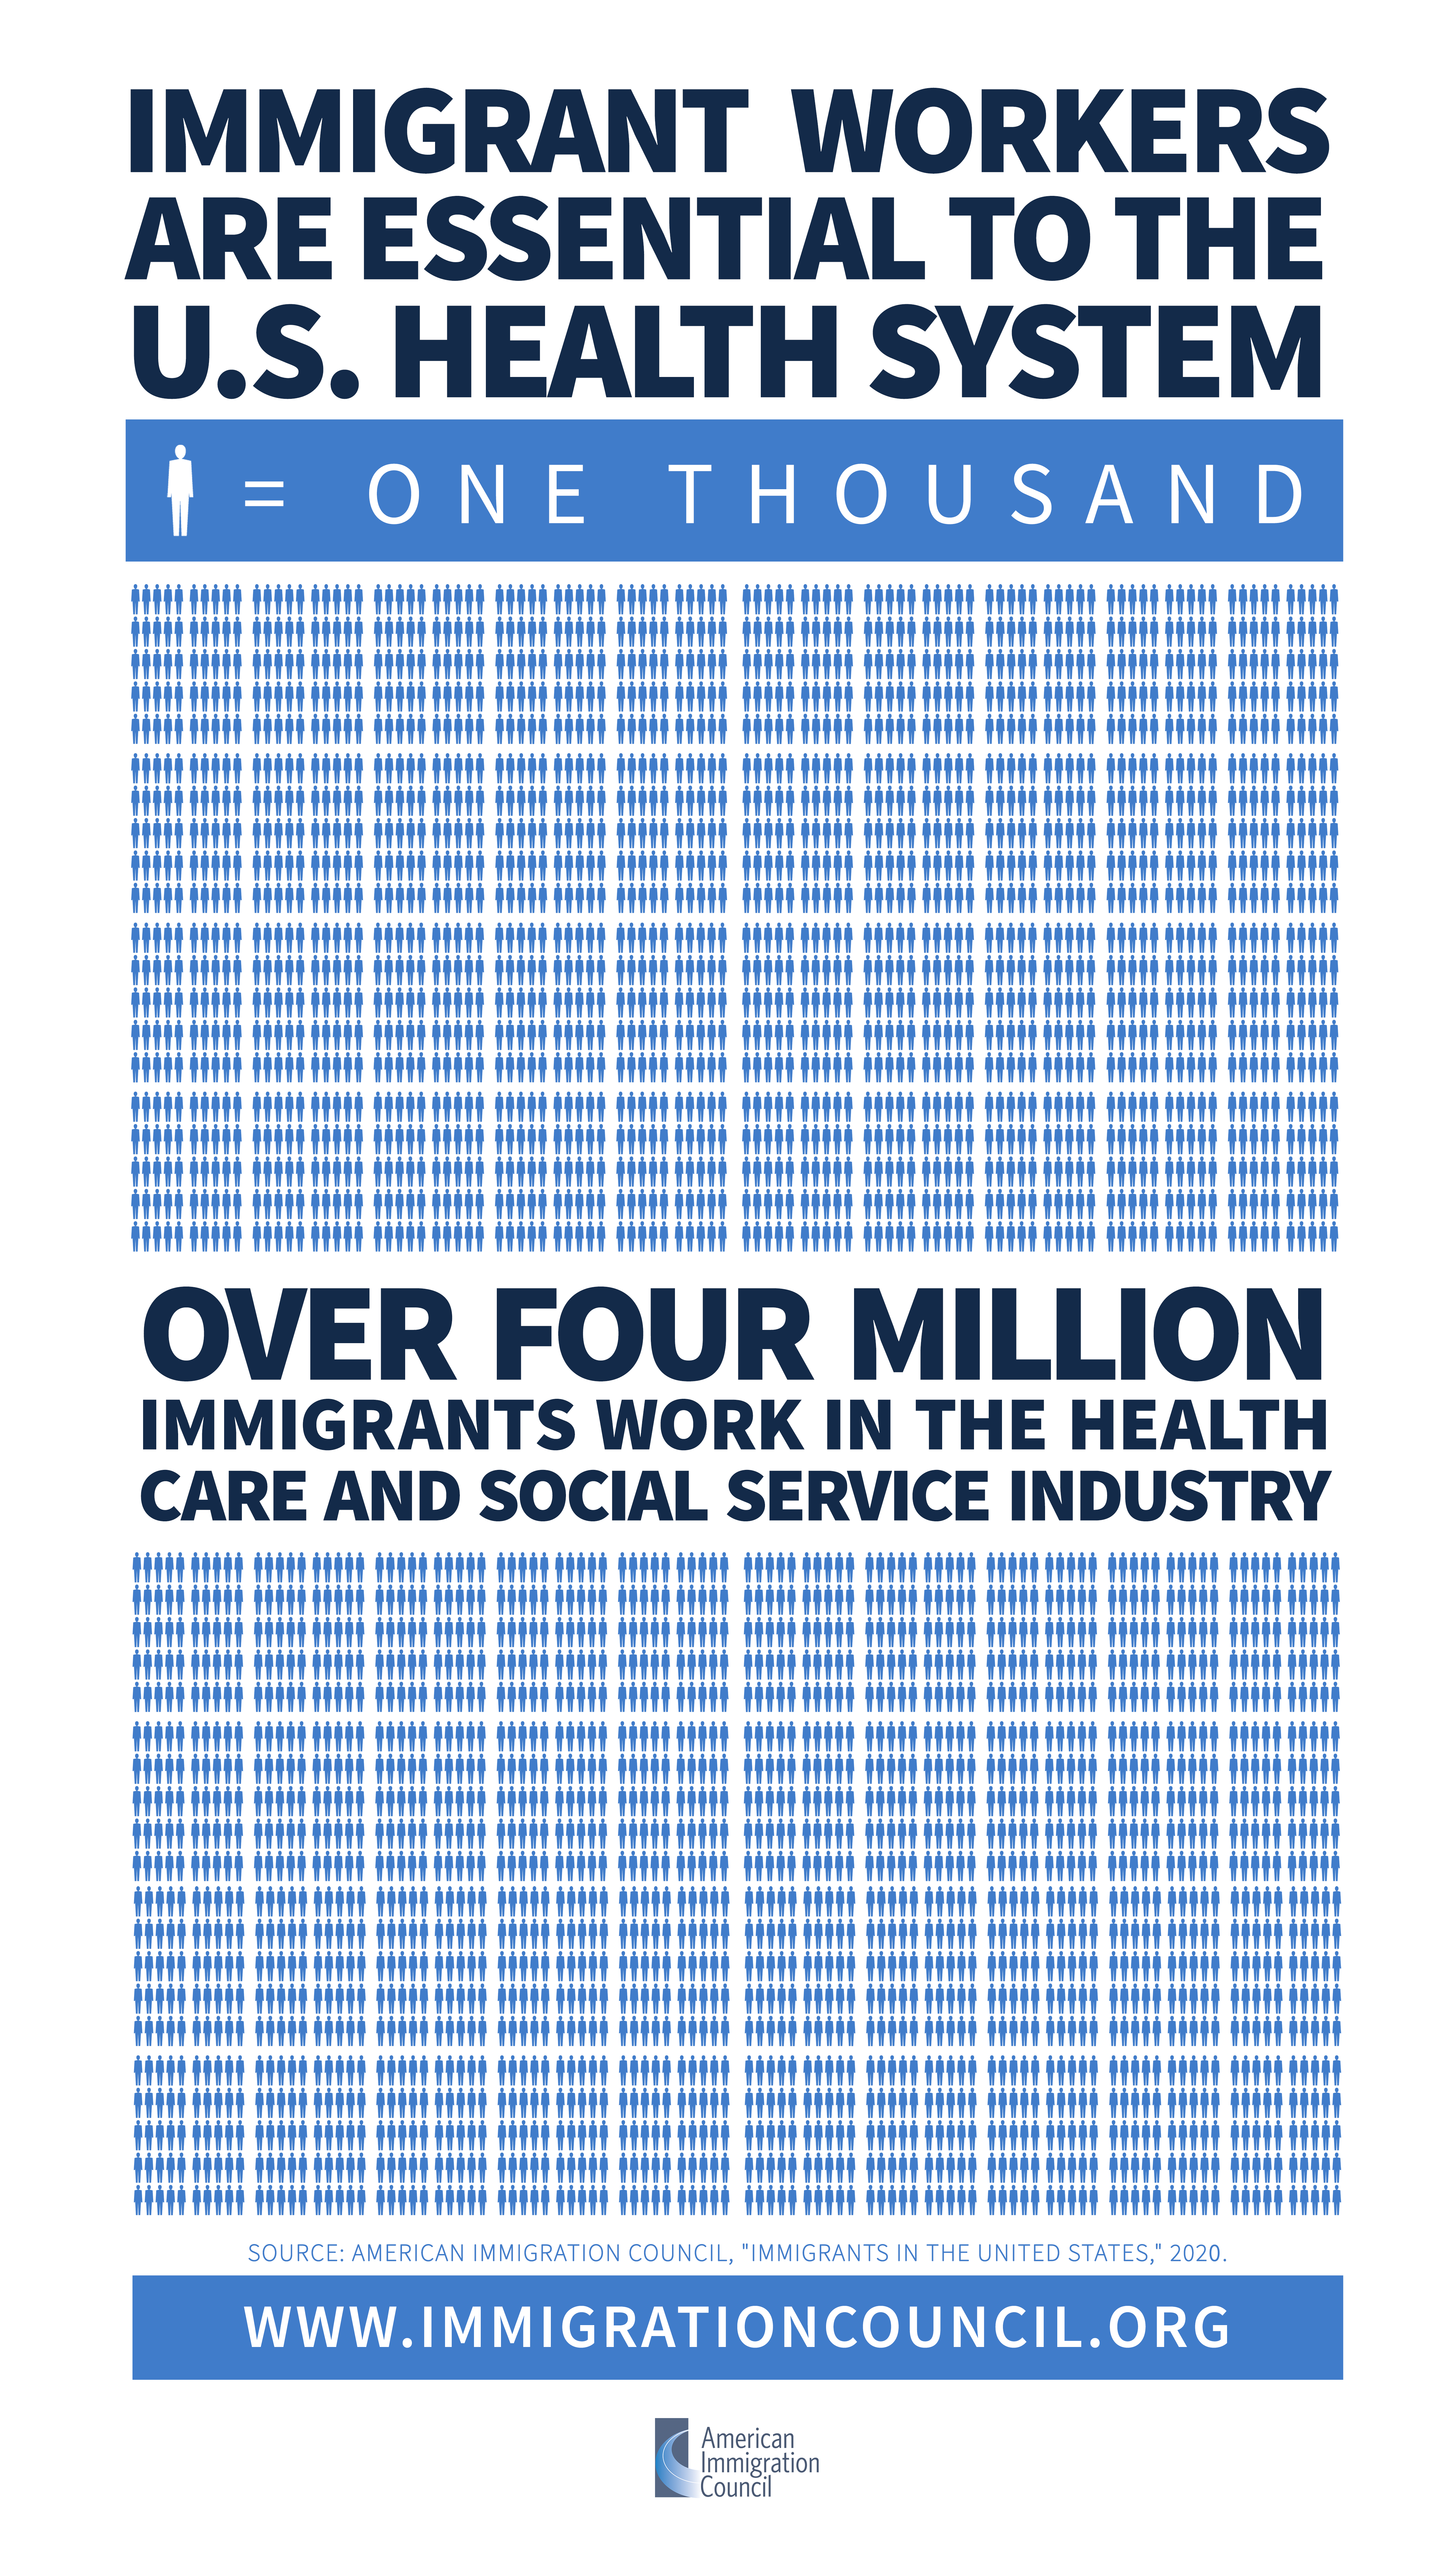 immigrants_in_the_united_states_infographic_2020_health-care.png